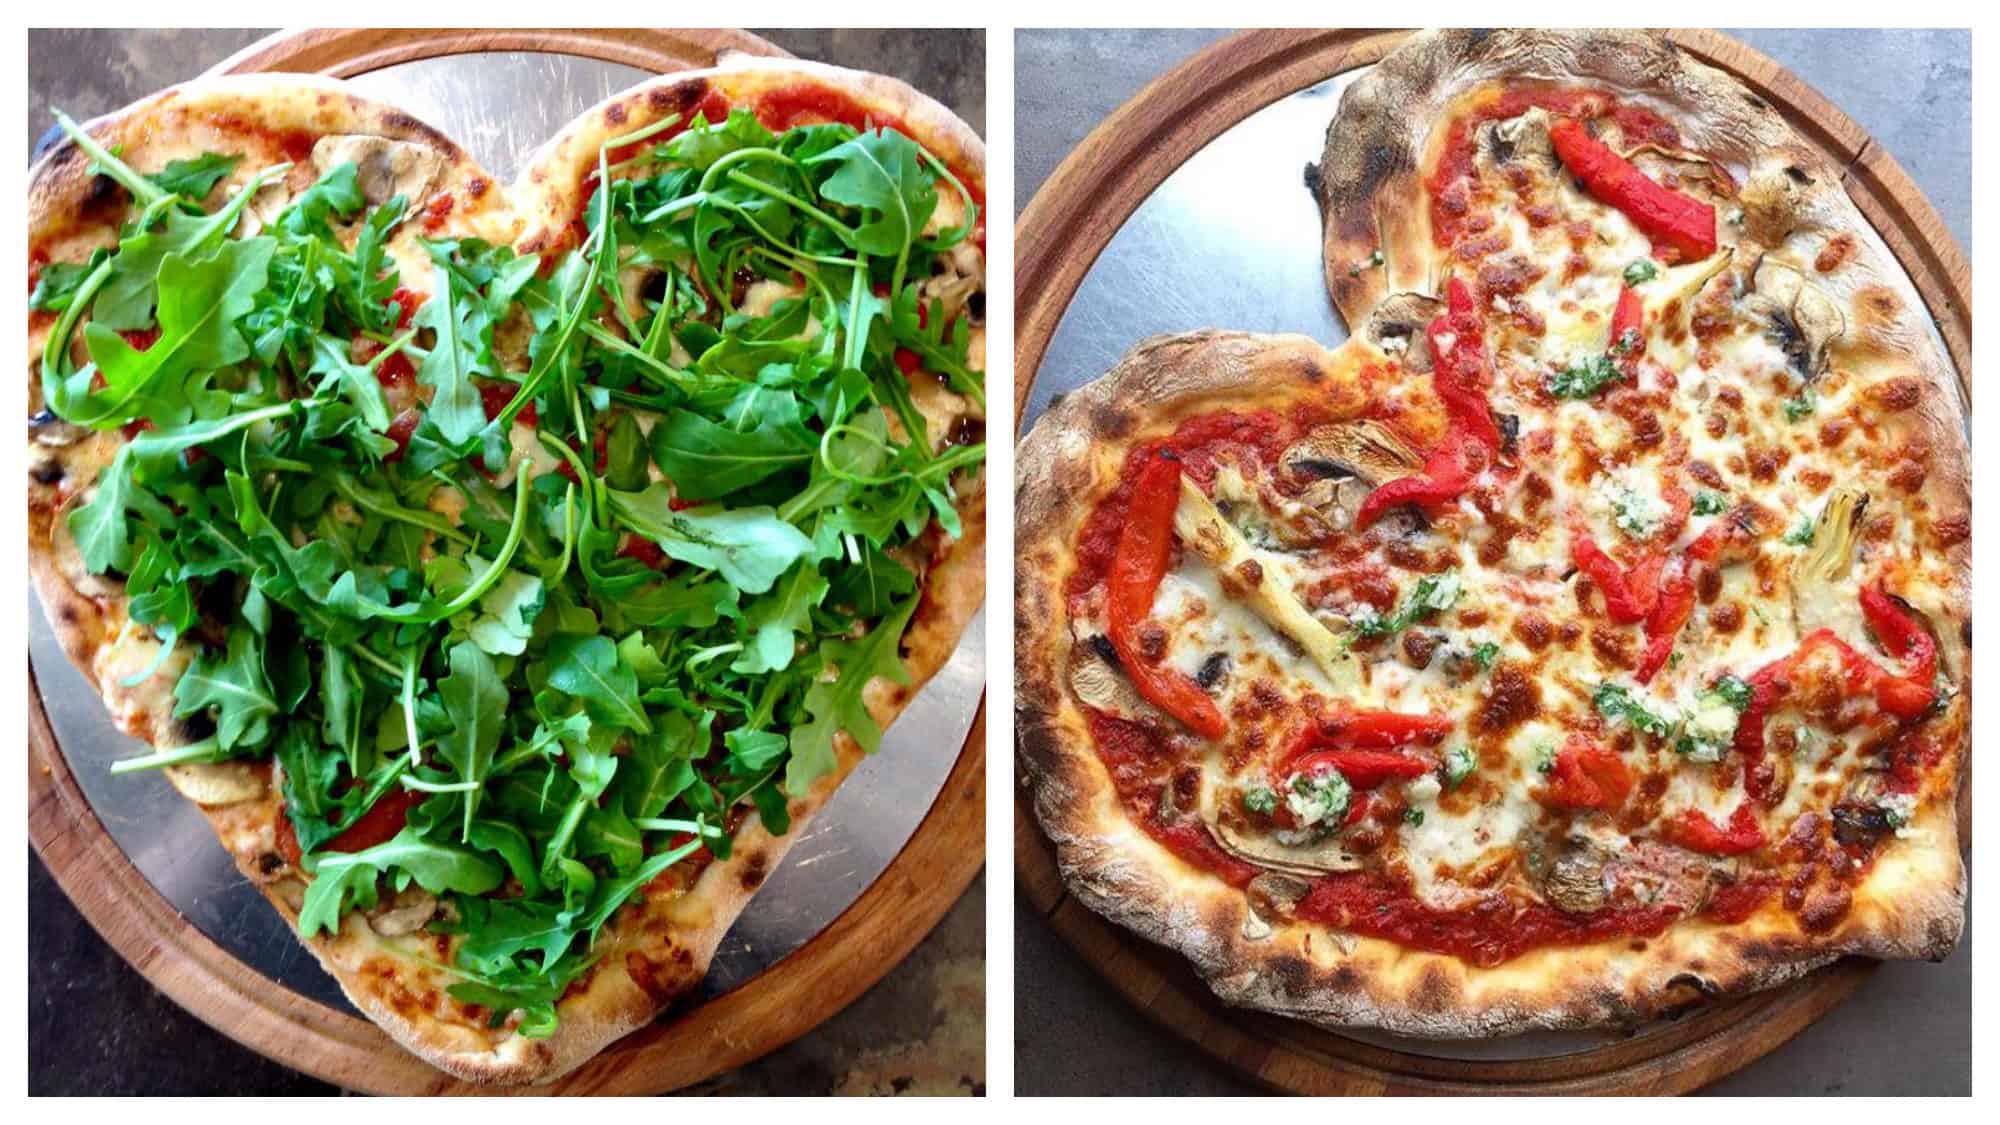 Heart-shaped gluten-free pizzas from Il Quadrifoglio in Paris. One has plenty of rocket leaves (left) and the other red peppers (right).